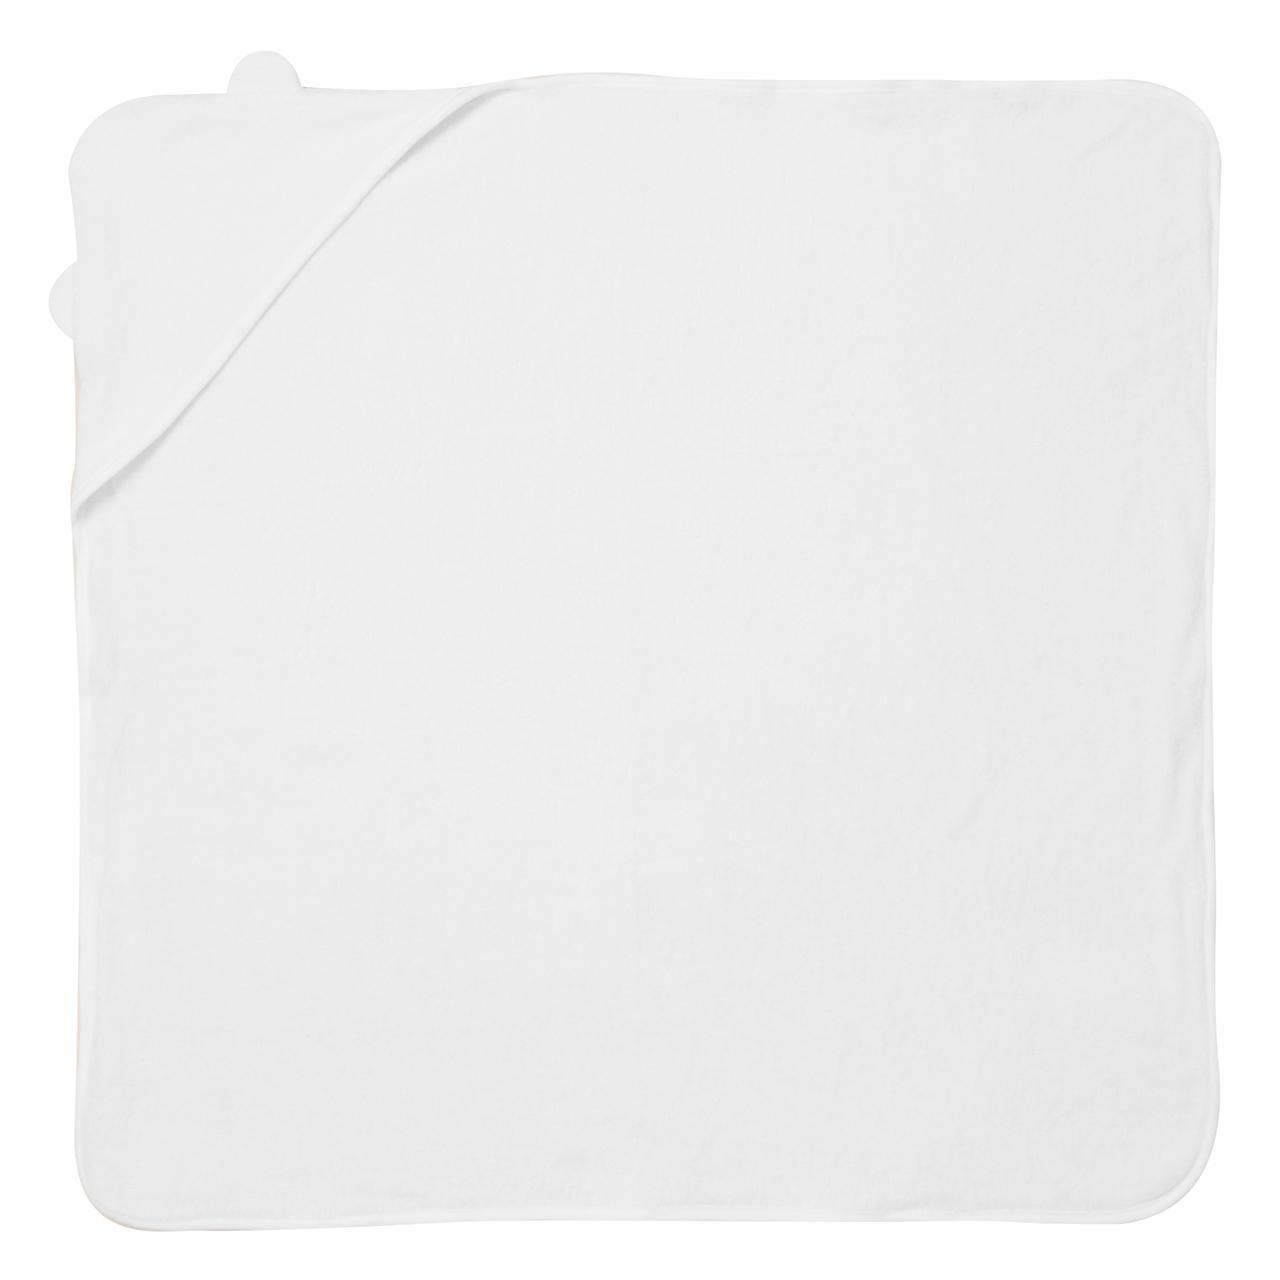 M&S Cotton Hooded Towel, one size, Ivory